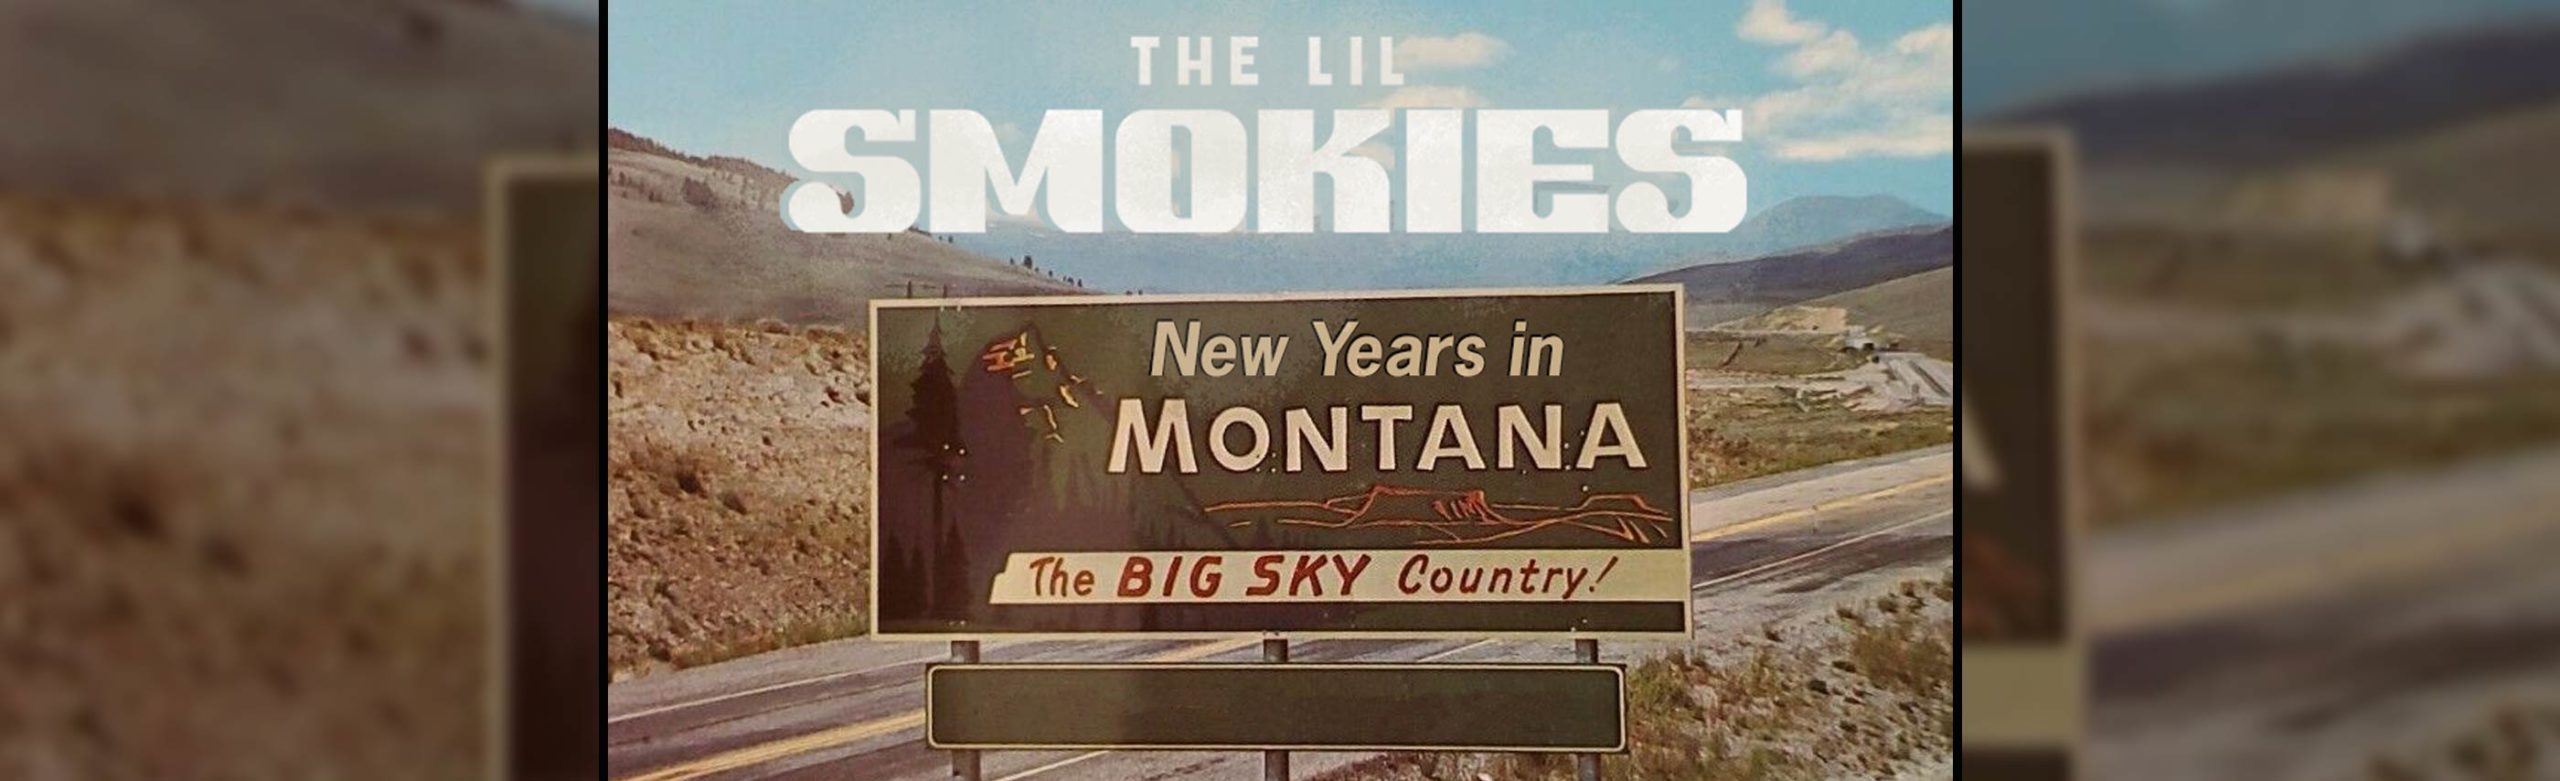 Win Tickets to The Lil Smokies in Montana at The ELM or The Wilma for NYE! Image